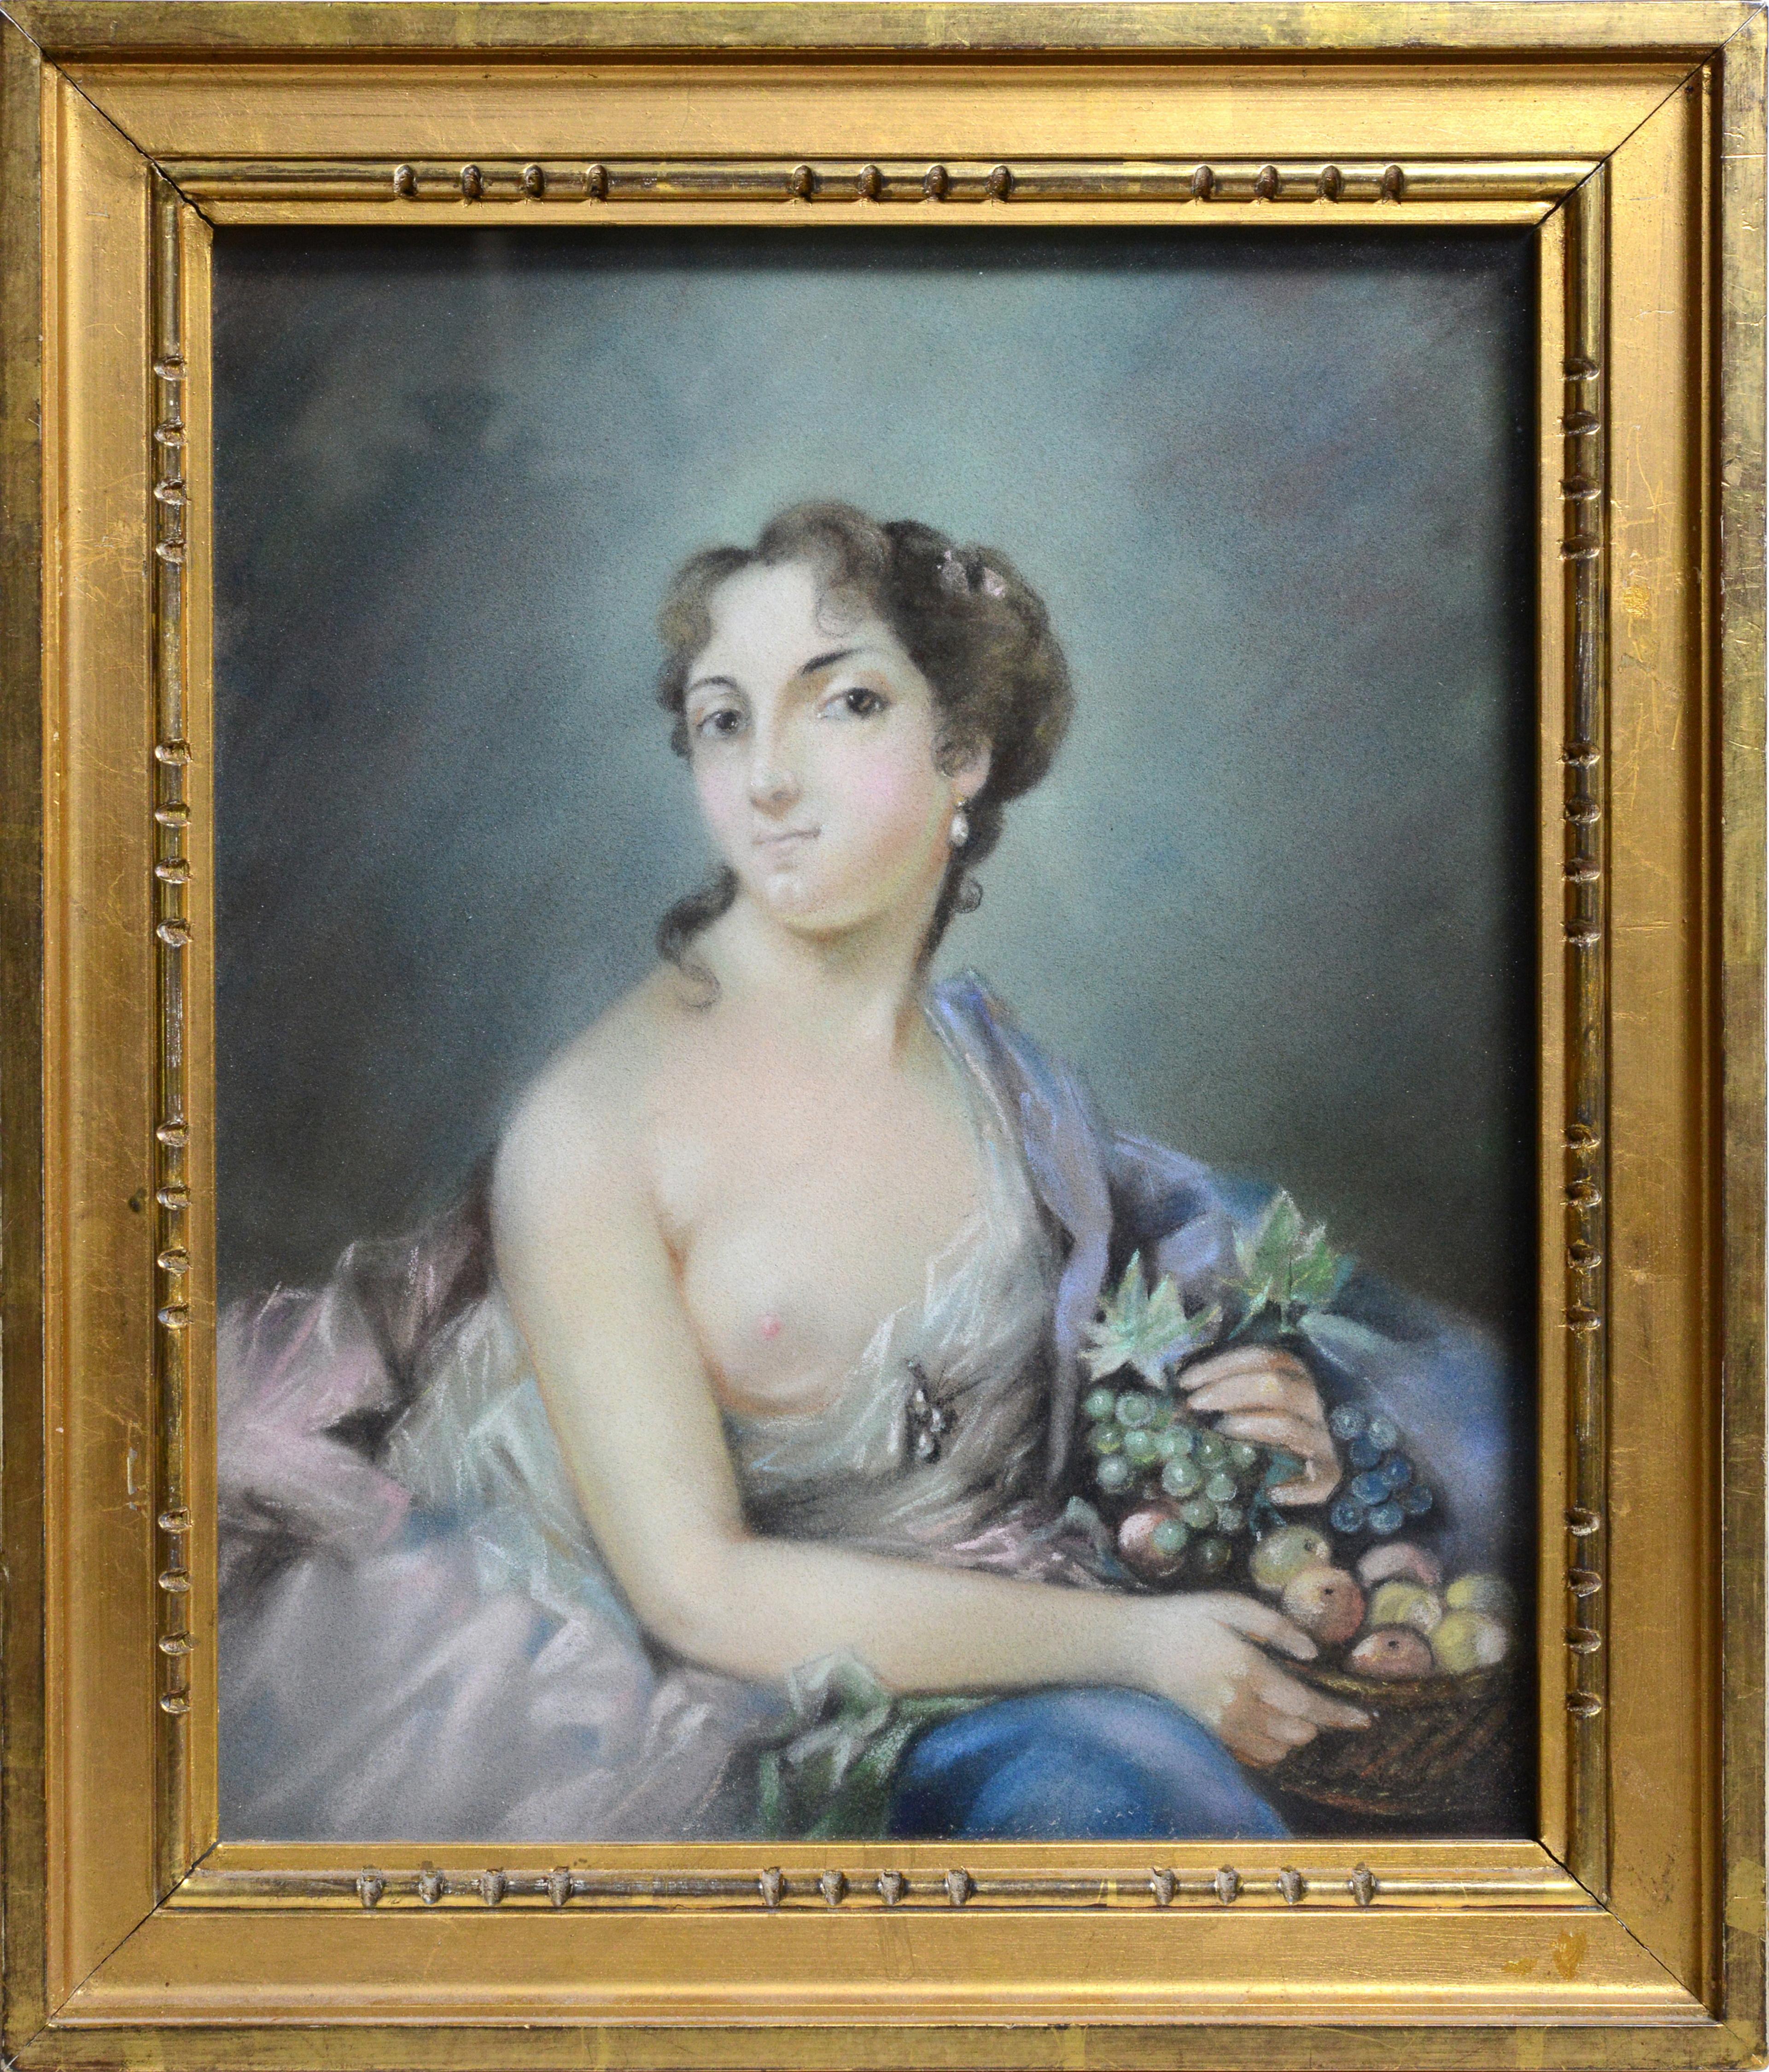 Rococo portrait Nude lady in Royal mantle Early 20th century Pastel drawing - Art by Unknown